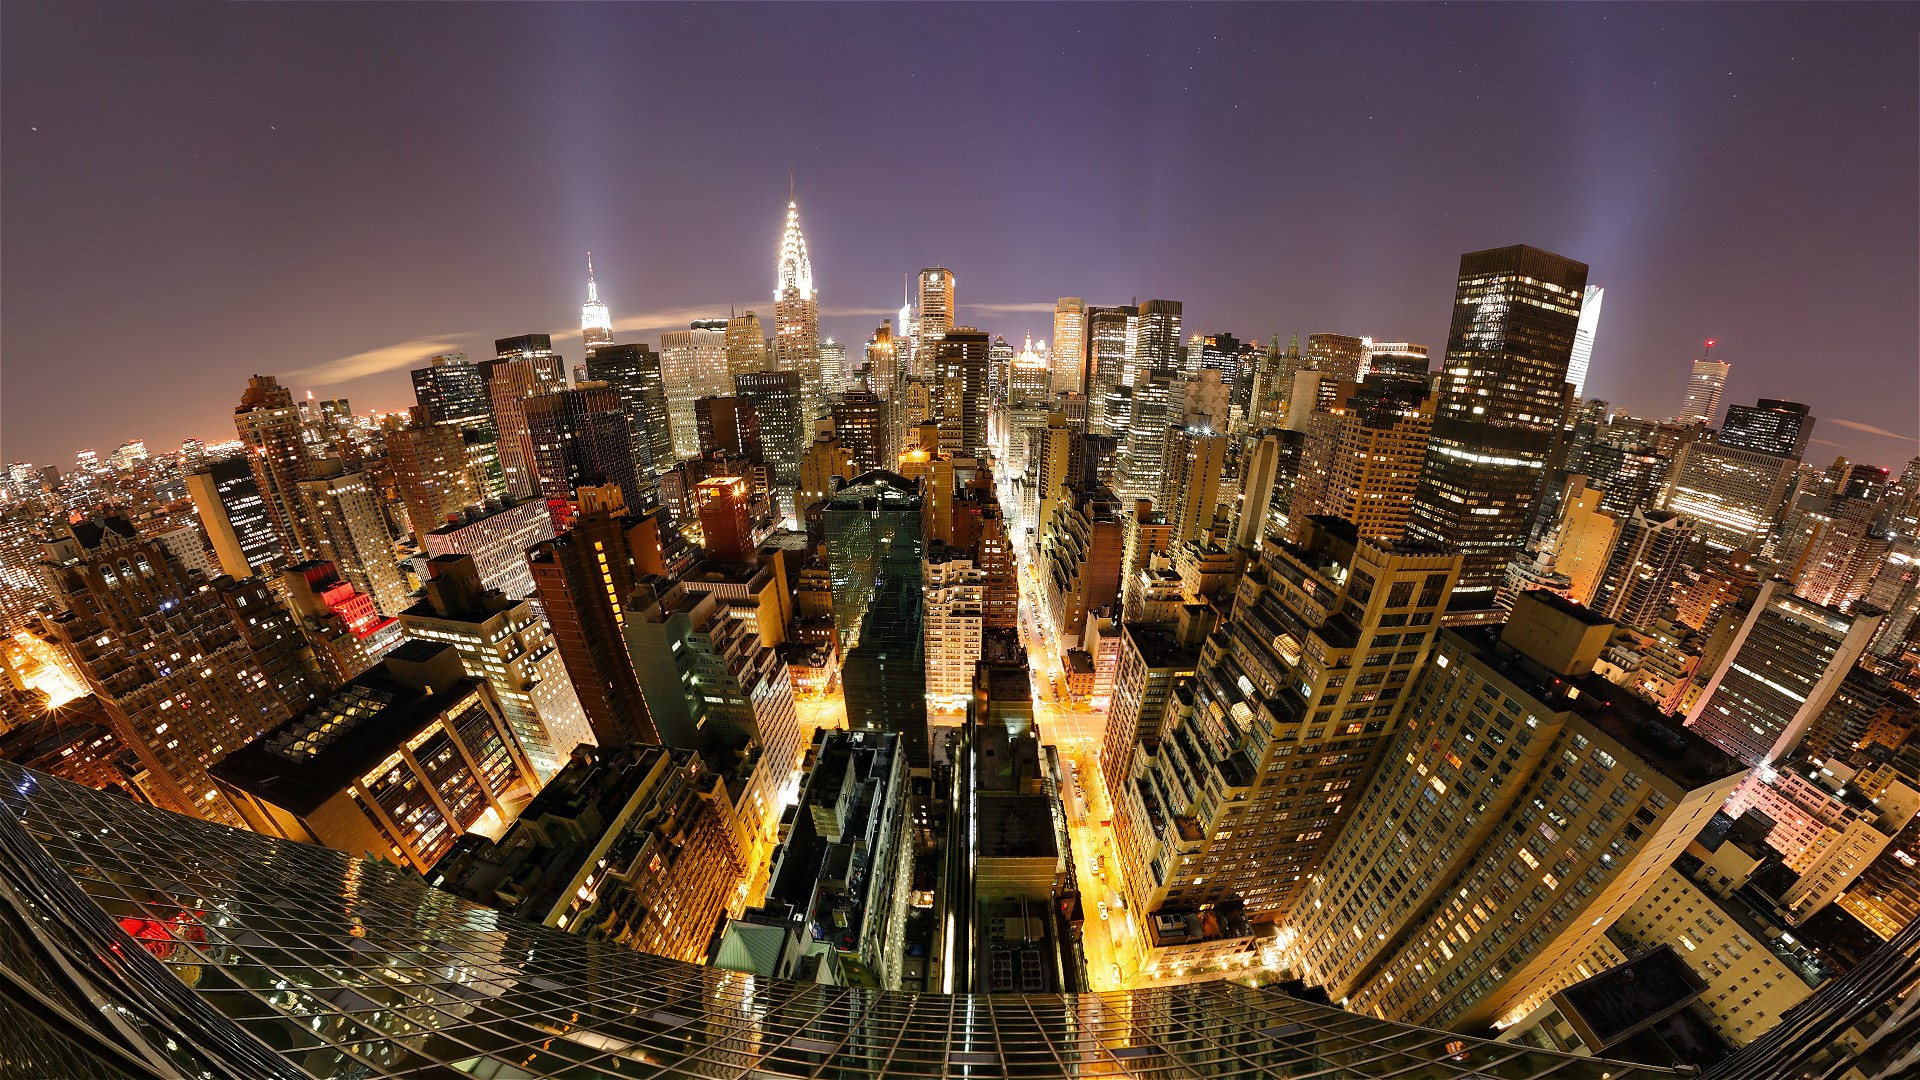 Description From New York City Pictures At Night Wallpaper